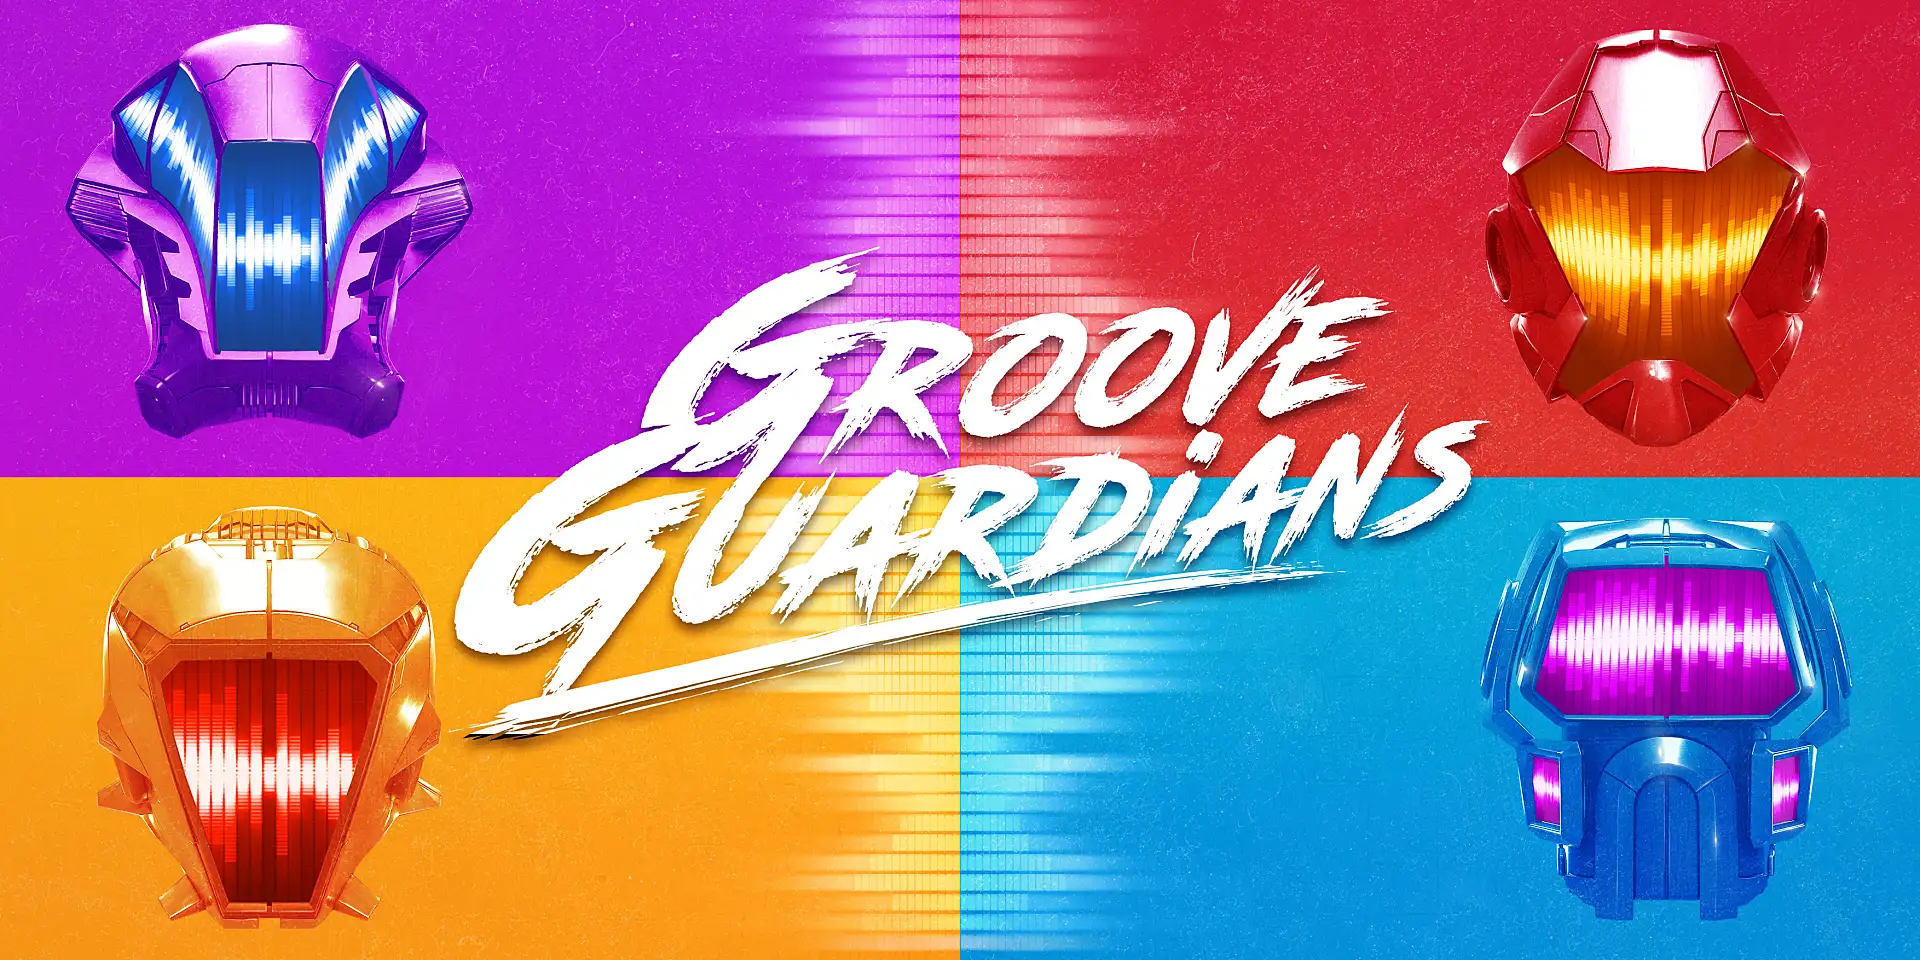 hologate cologne westbowling groove guardians GROOVEGUARDIANS Poster 2zu1 V2